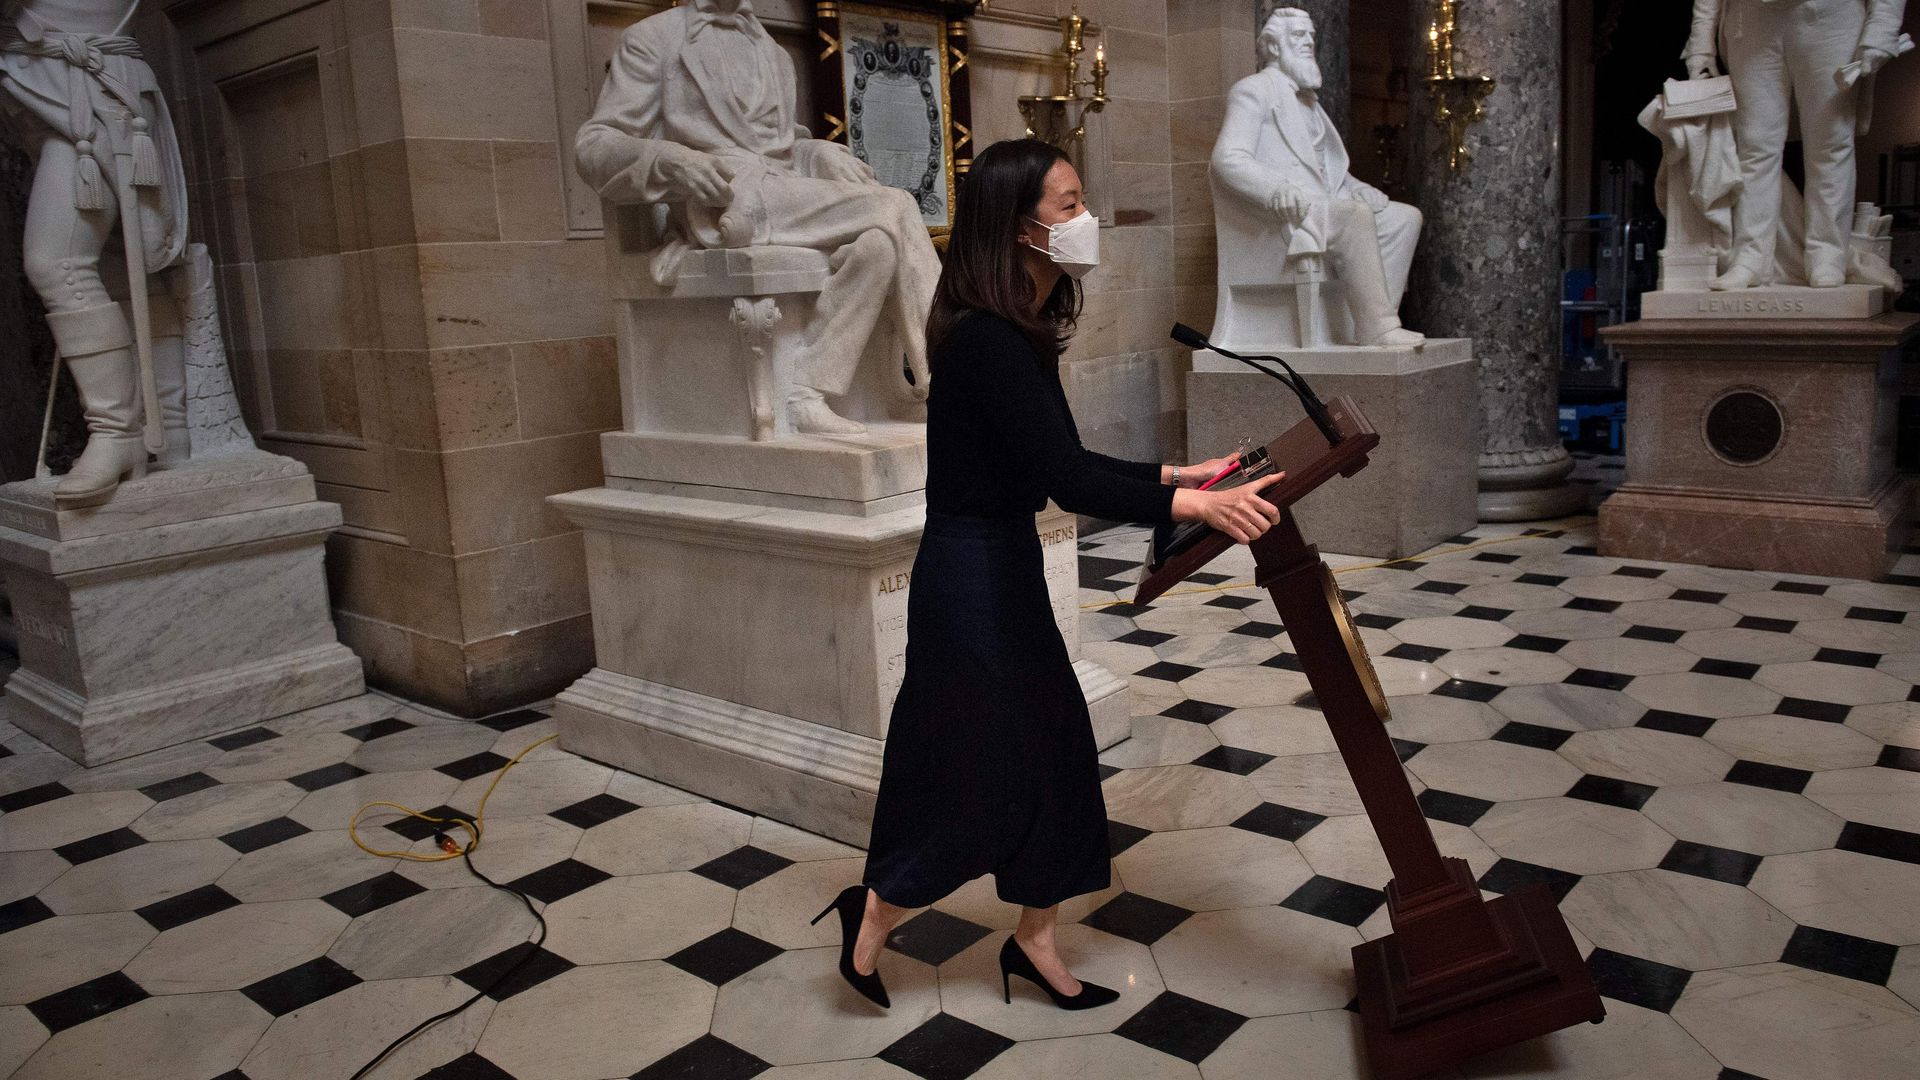 A House aide is seen wheeling the speaker's podium back through the Capitol after it was moved by invaders last week.